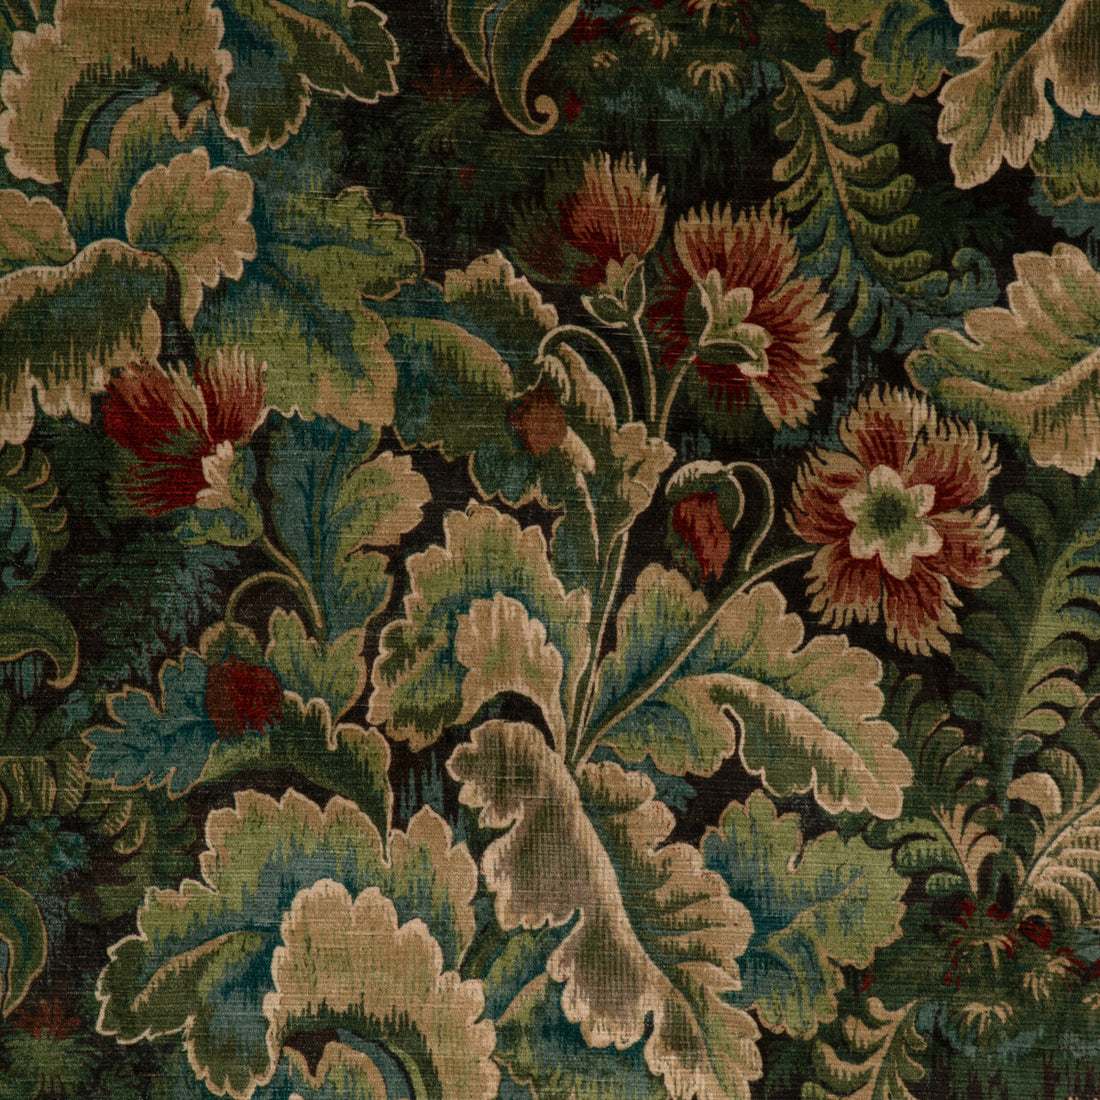 Barwick Velvet fabric in antique color - pattern 2023112.630.0 - by Lee Jofa in the Barwick Velvets collection